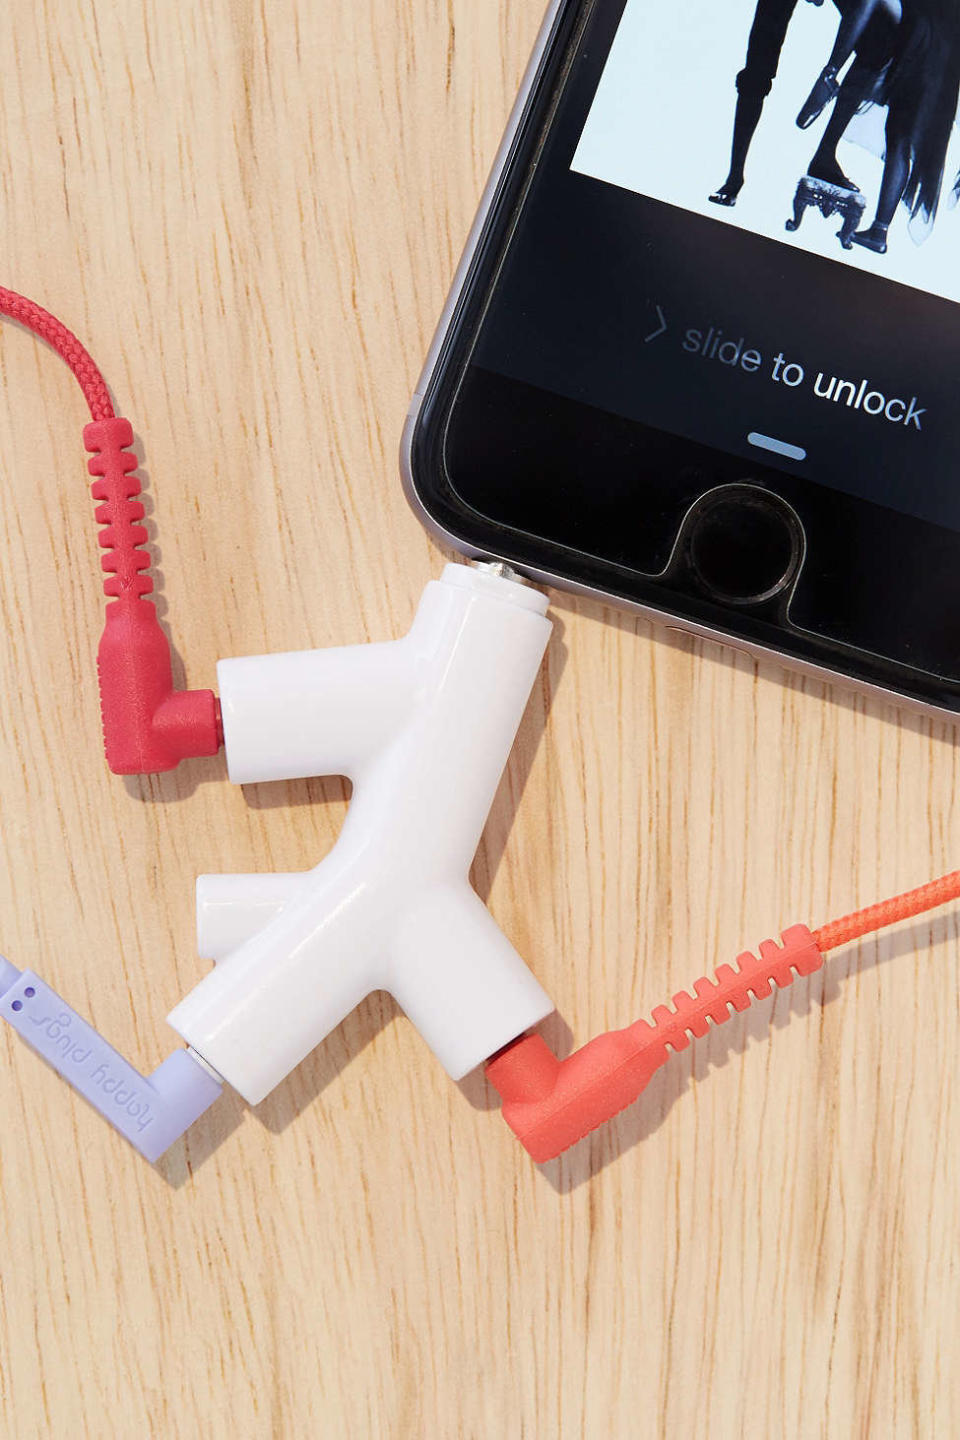 Music Branches Headphone&nbsp;Splitter, $10, <a href="http://www.urbanoutfitters.com/urban/catalog/productdetail.jsp?id=39079652&amp;category=A-TECH-PHONE" target="_blank">Urban Outfitters</a>